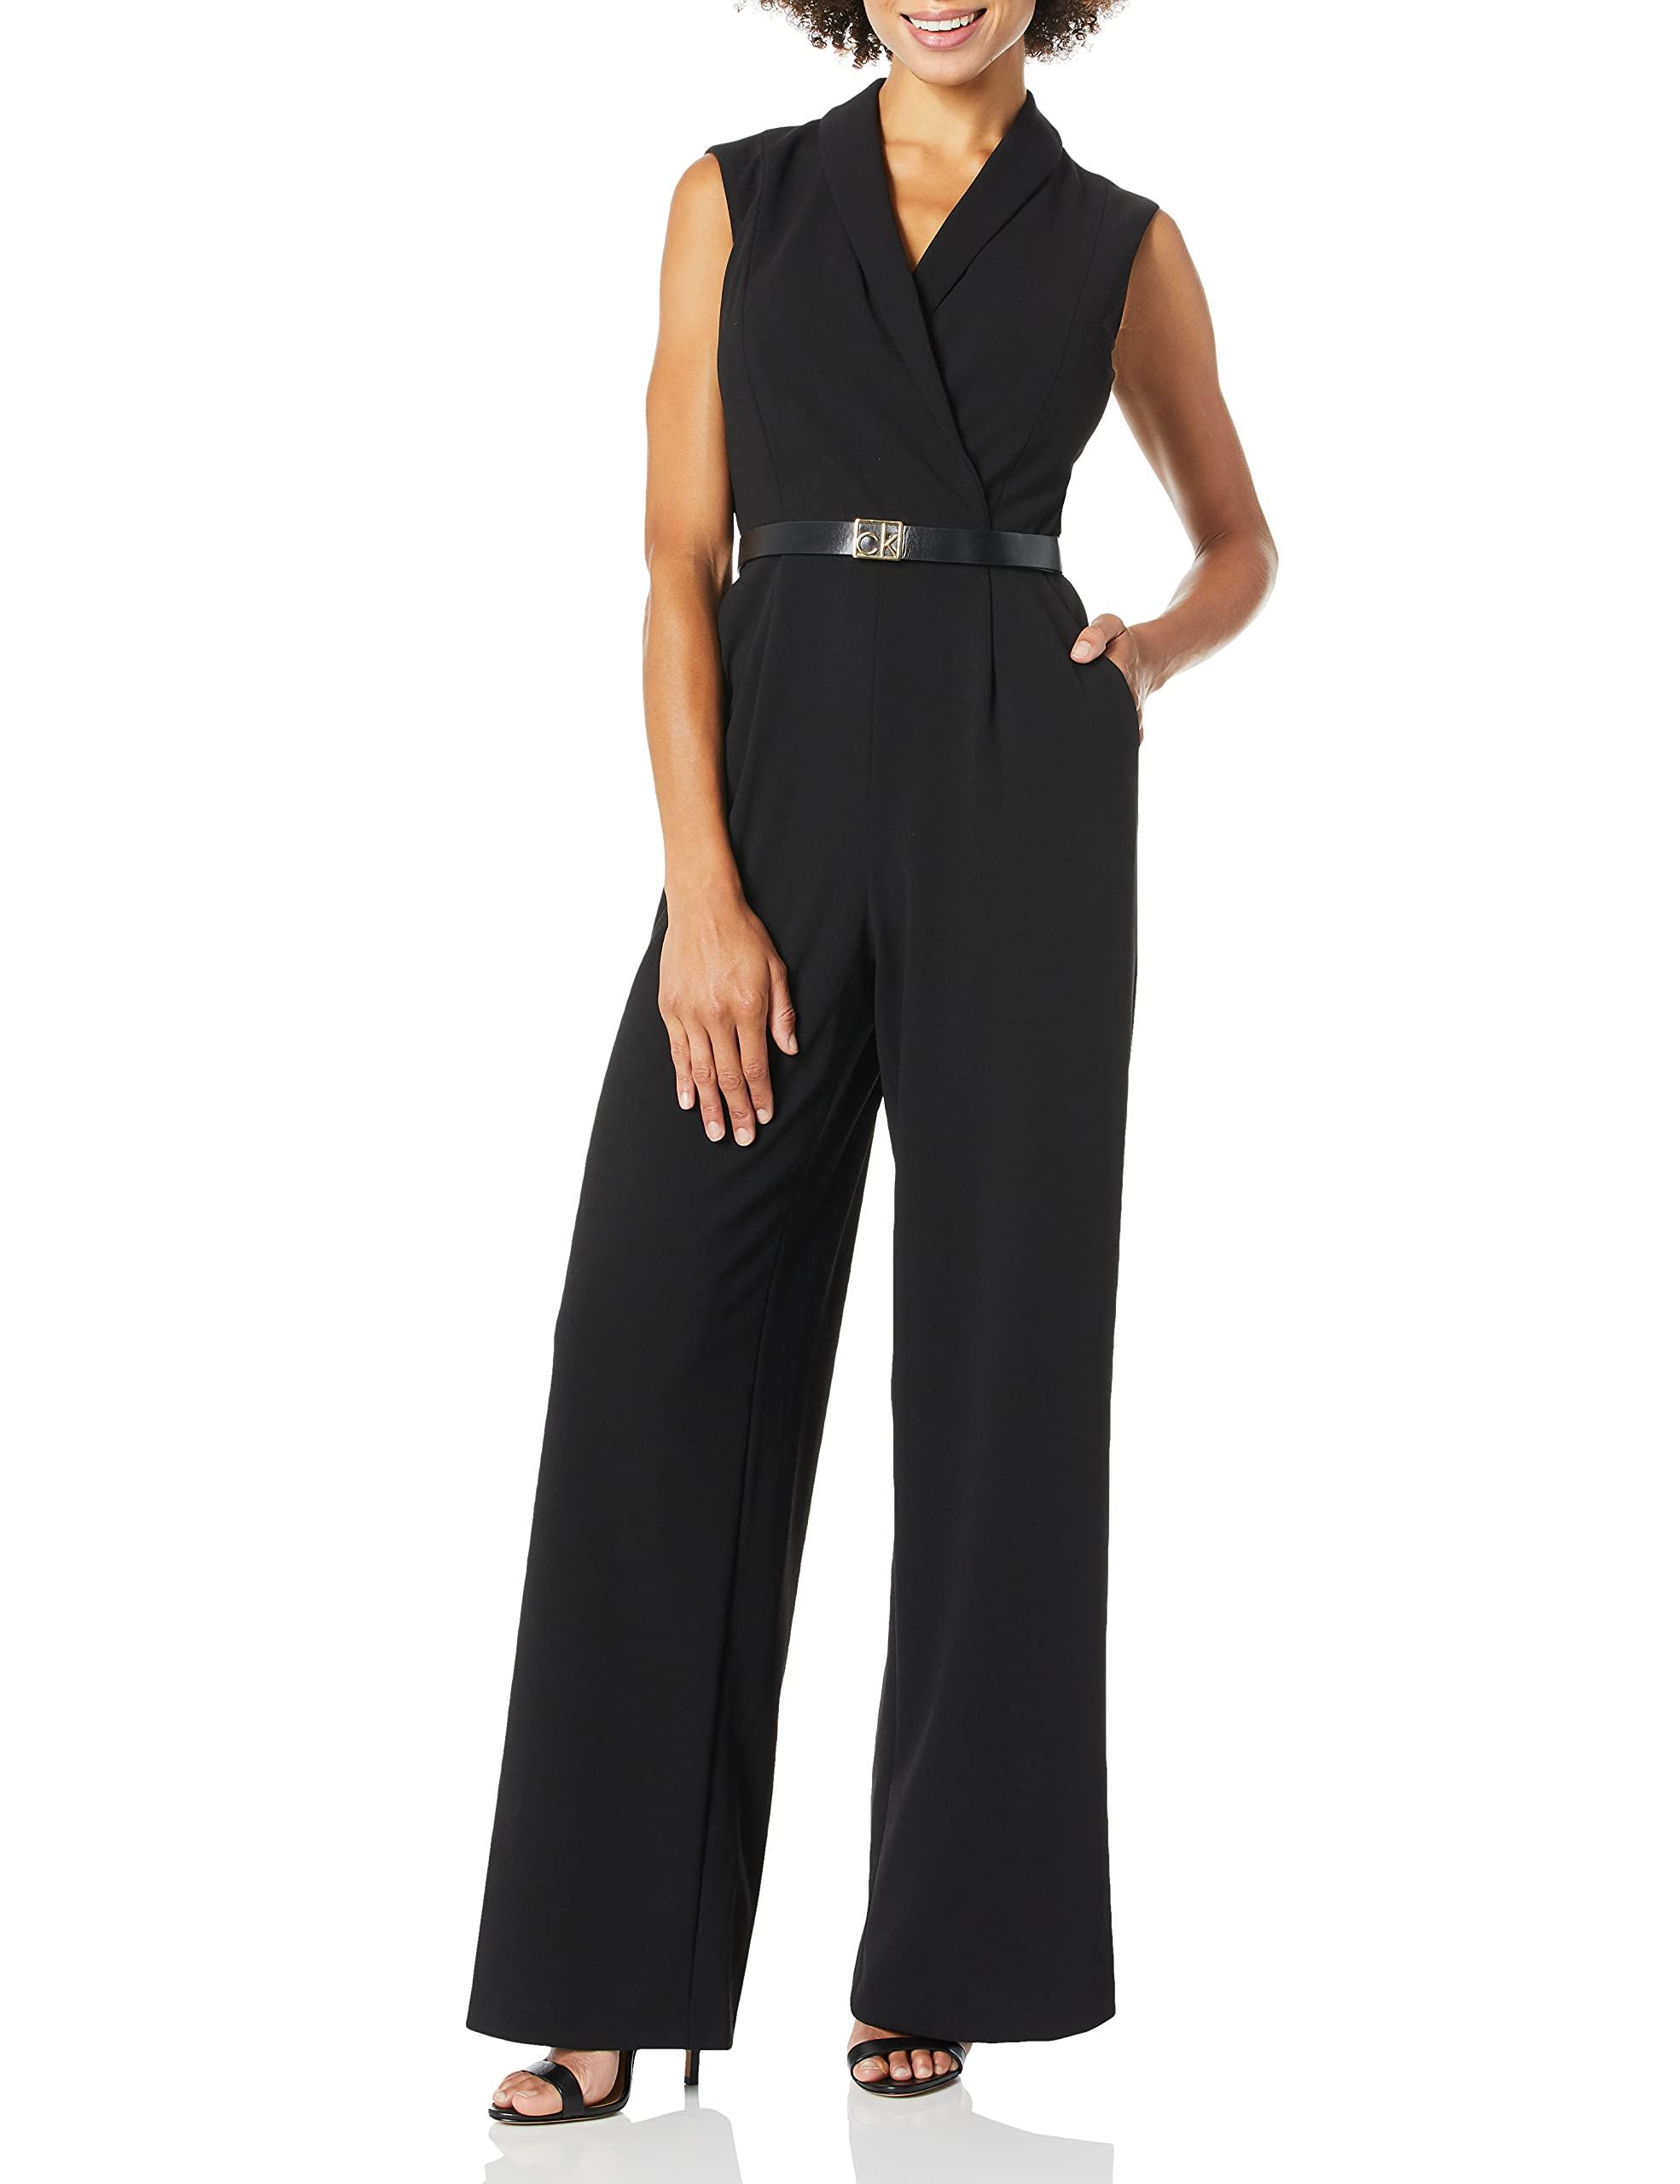 Calvin Klein Sleeveless Belted Jumpsuit With V Neck Collar in Black | Lyst